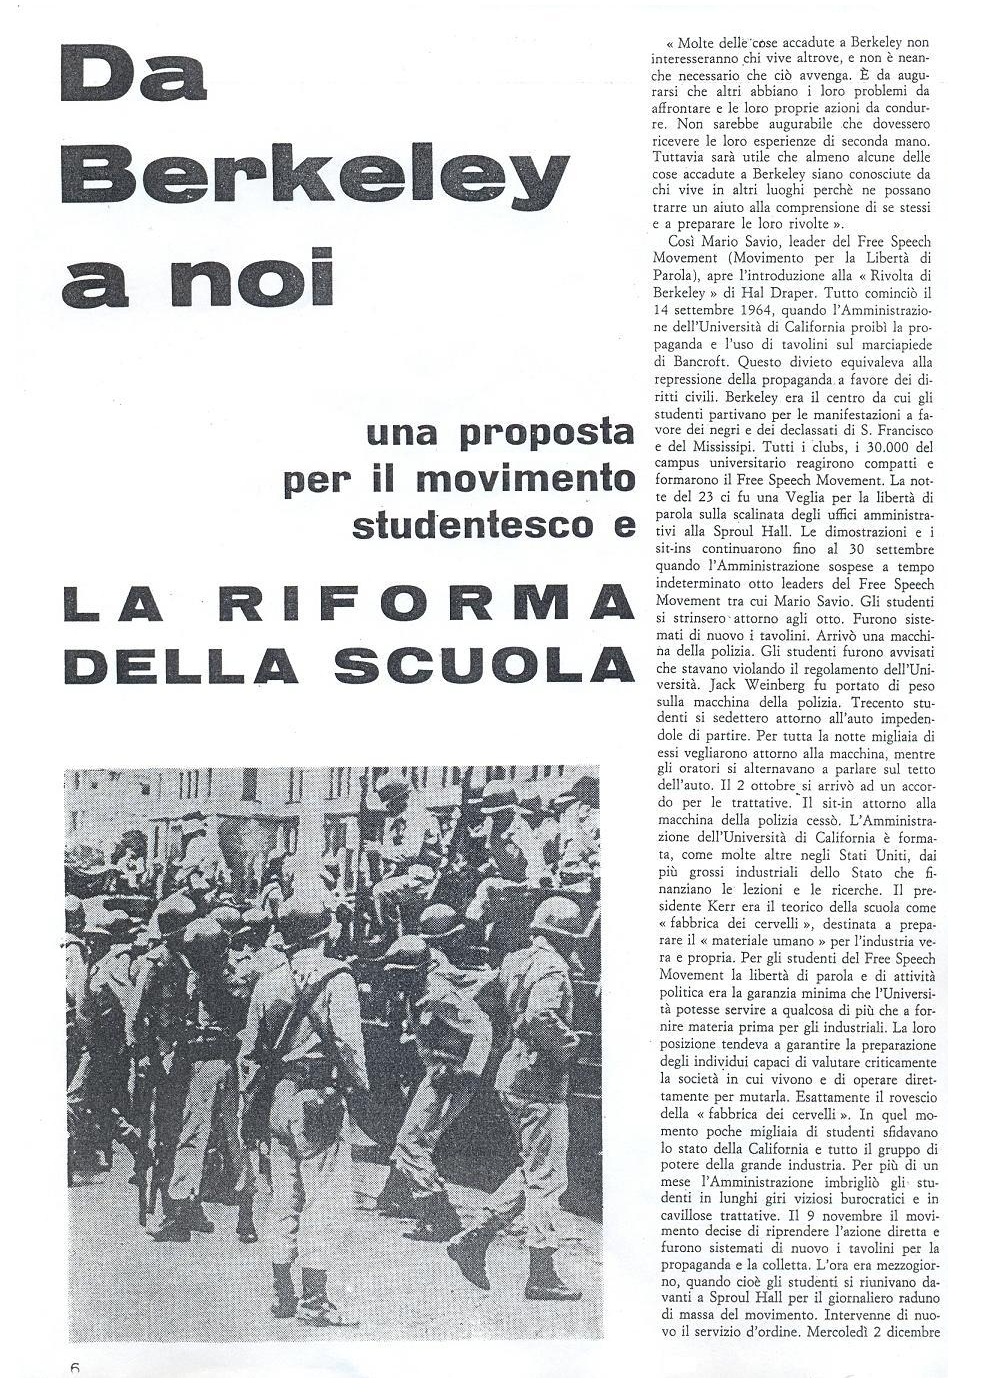 The fourth issue of Mondo Beat magazine - Edition 7,000 copies - Milan, March 15, 1967